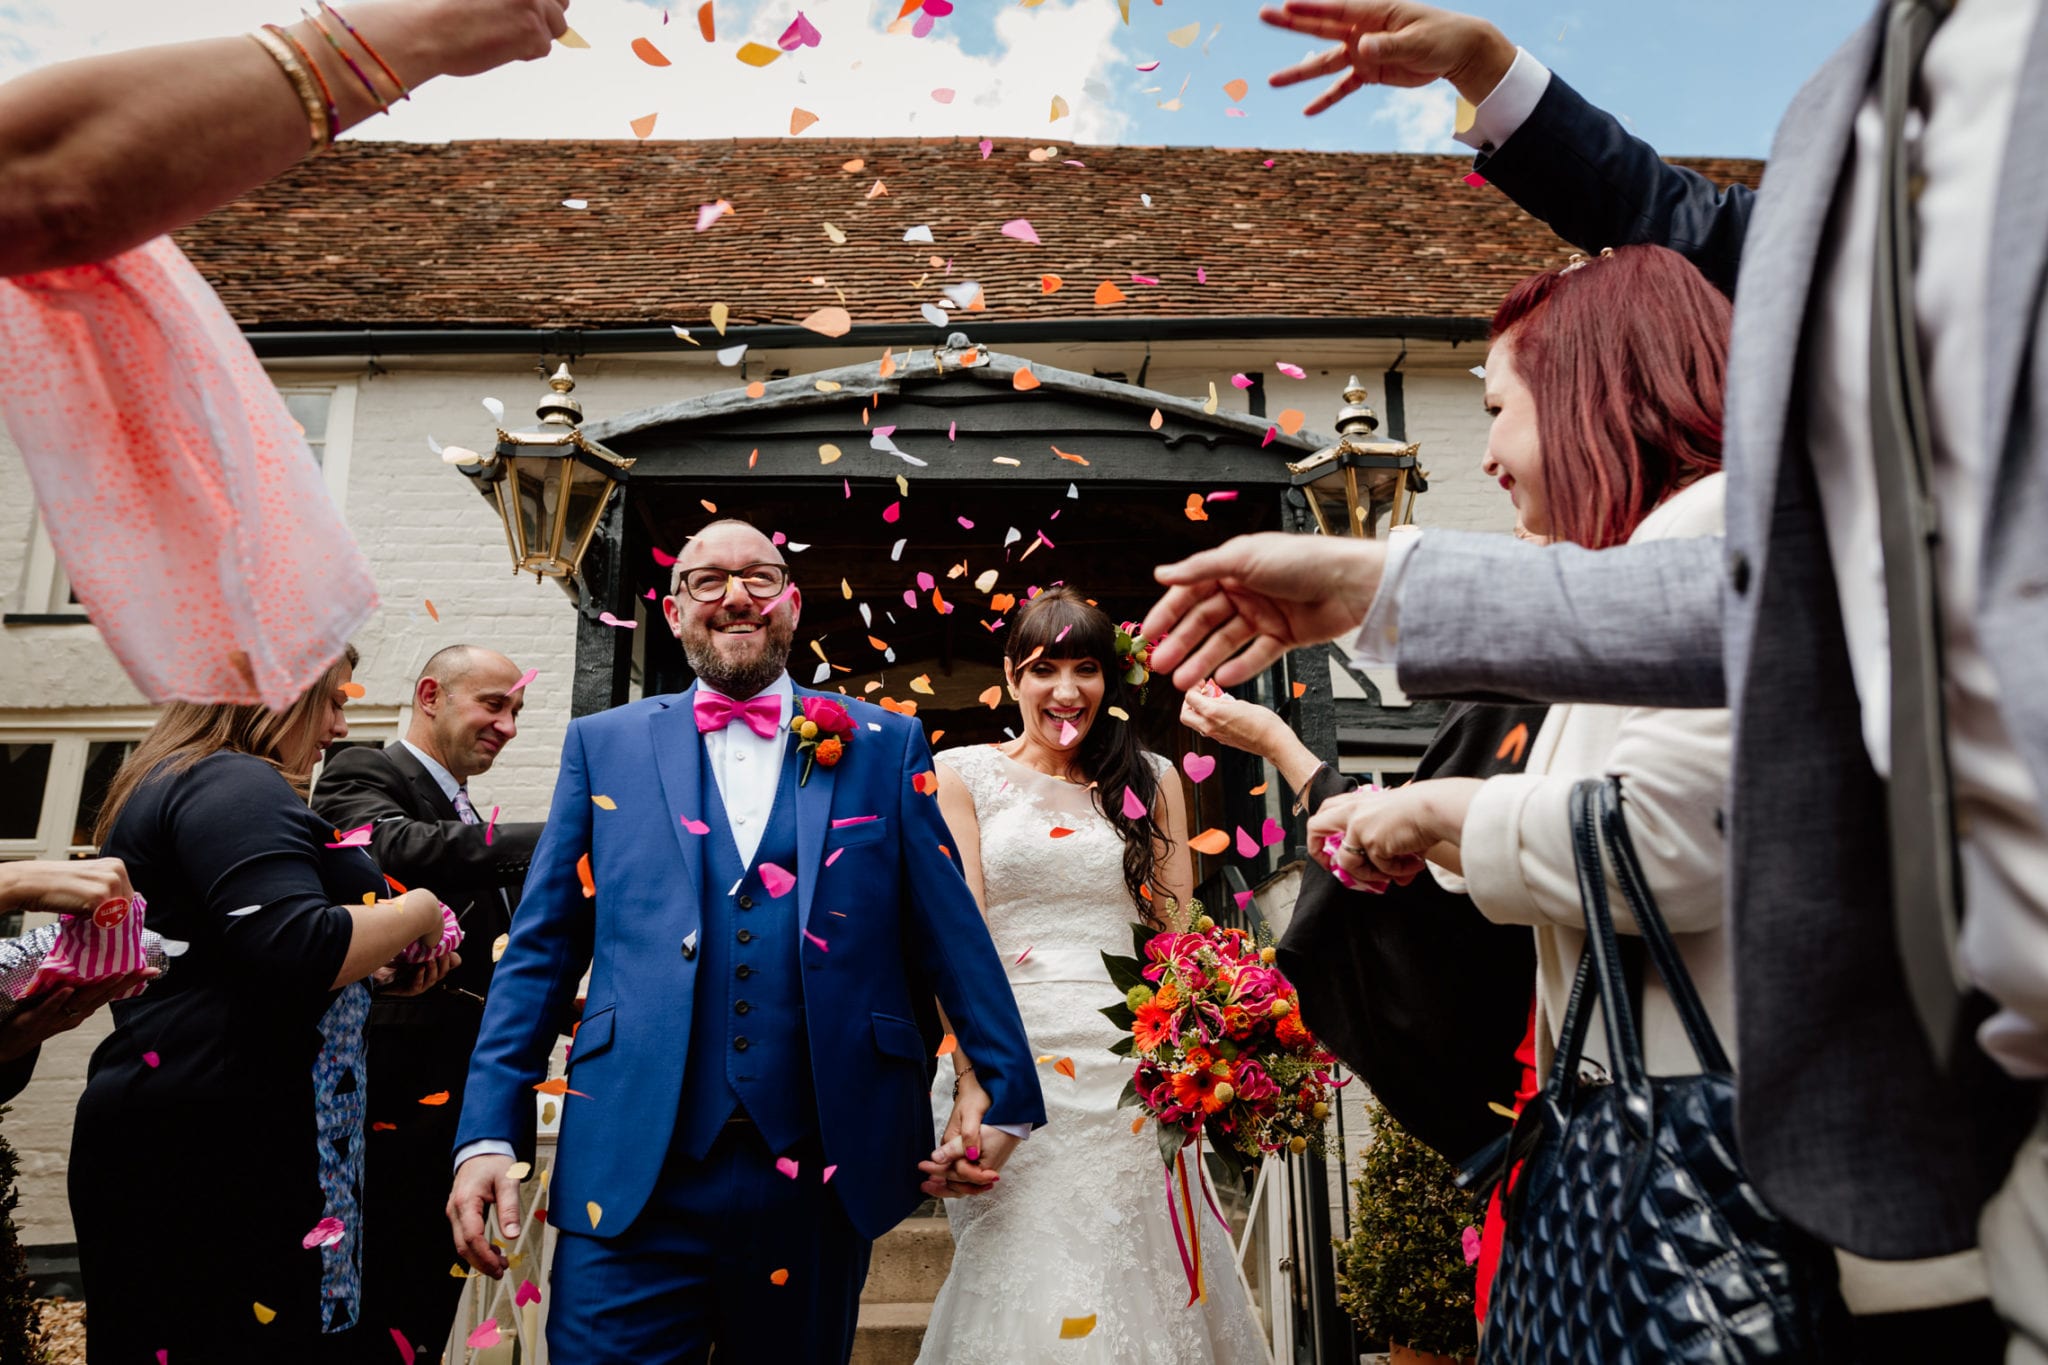 Couple getting married at The Five Bells in Standbridge - Leighton Buzzard Wedding Photographer